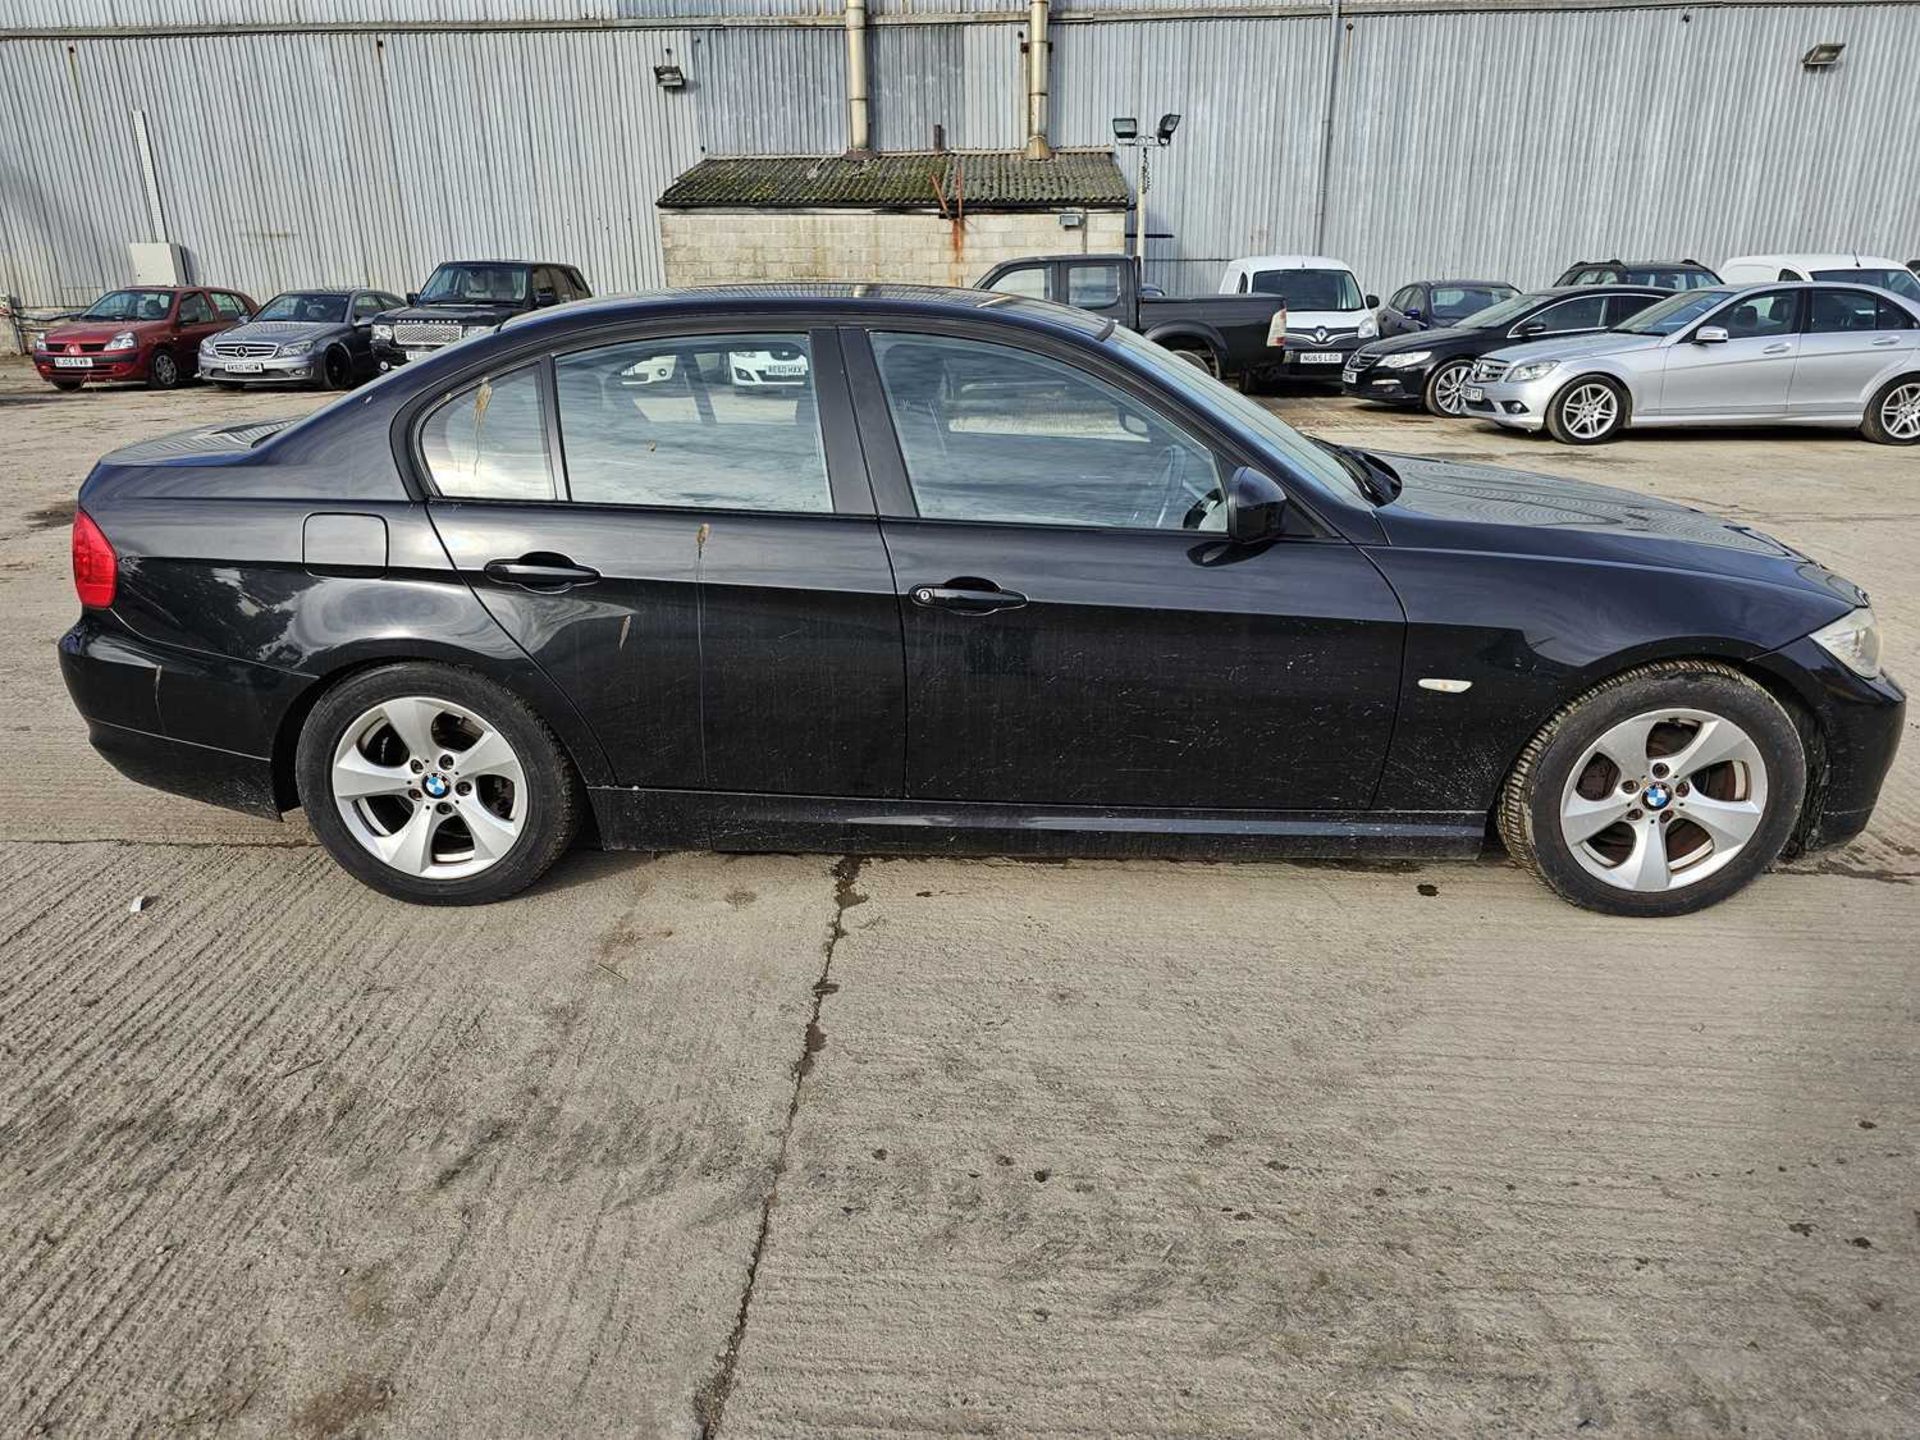 2011 BMW 320D, 6 Speed, Parking Sensors, Bluetooth, A/C (NO VAT)(Reg. Docs. Available, Tested 01/25) - Image 6 of 28